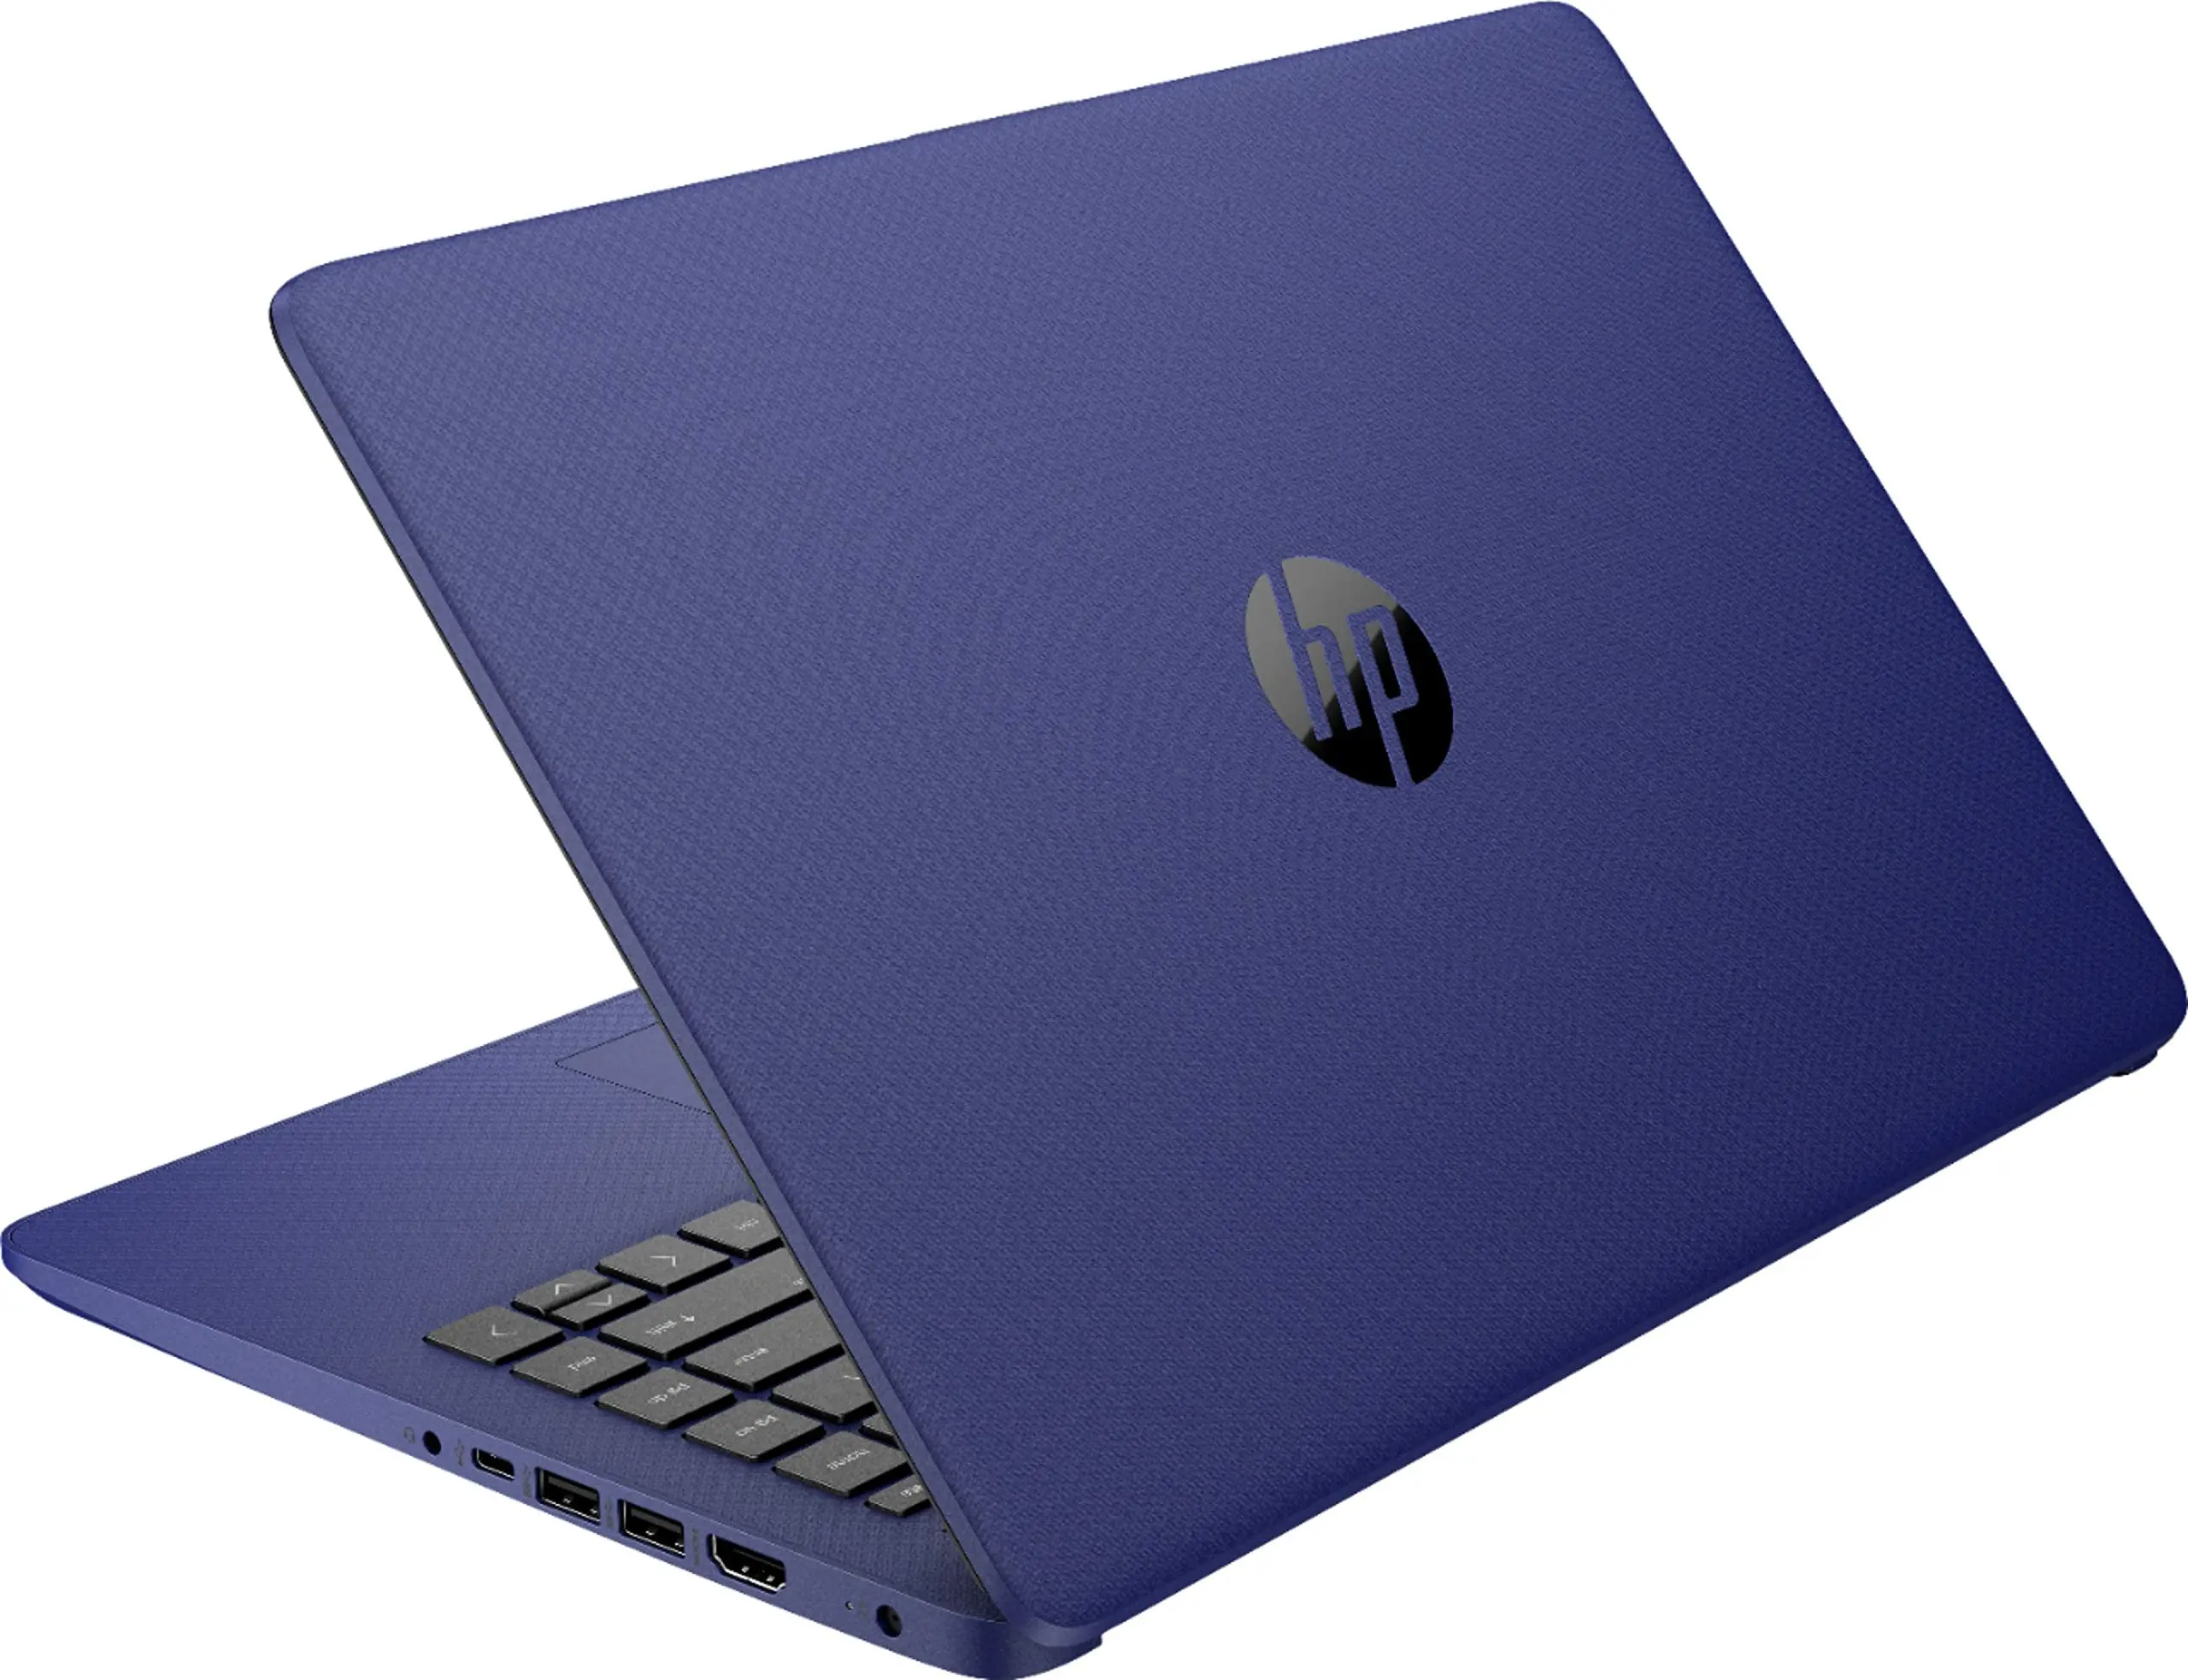 bluetooth hewlett packard laptops usb chip - How do I Connect my Bluetooth USB to my laptop